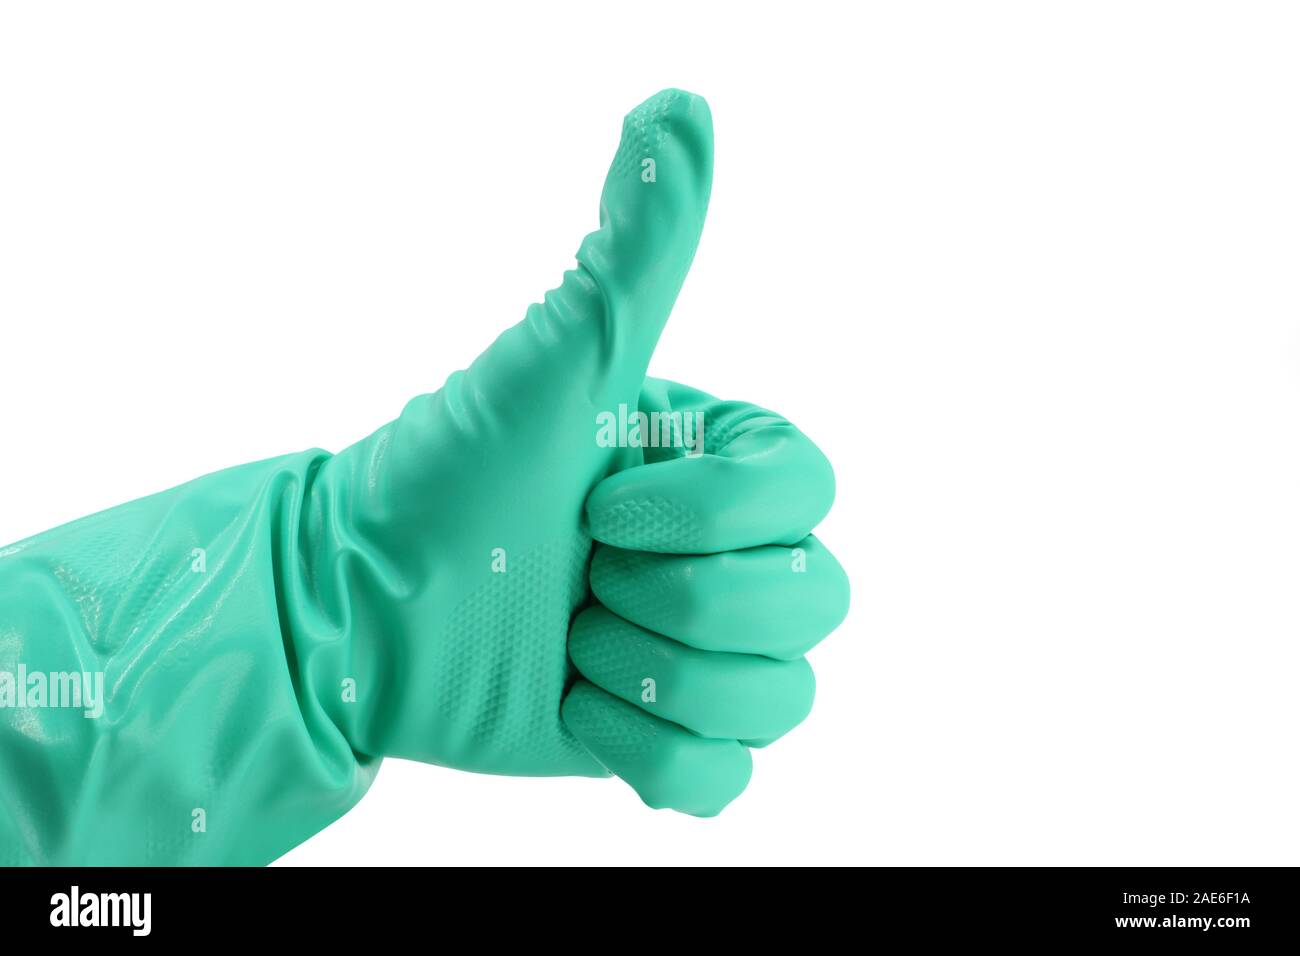 Thumbs up with a green vinyl glove on white background Stock Photo